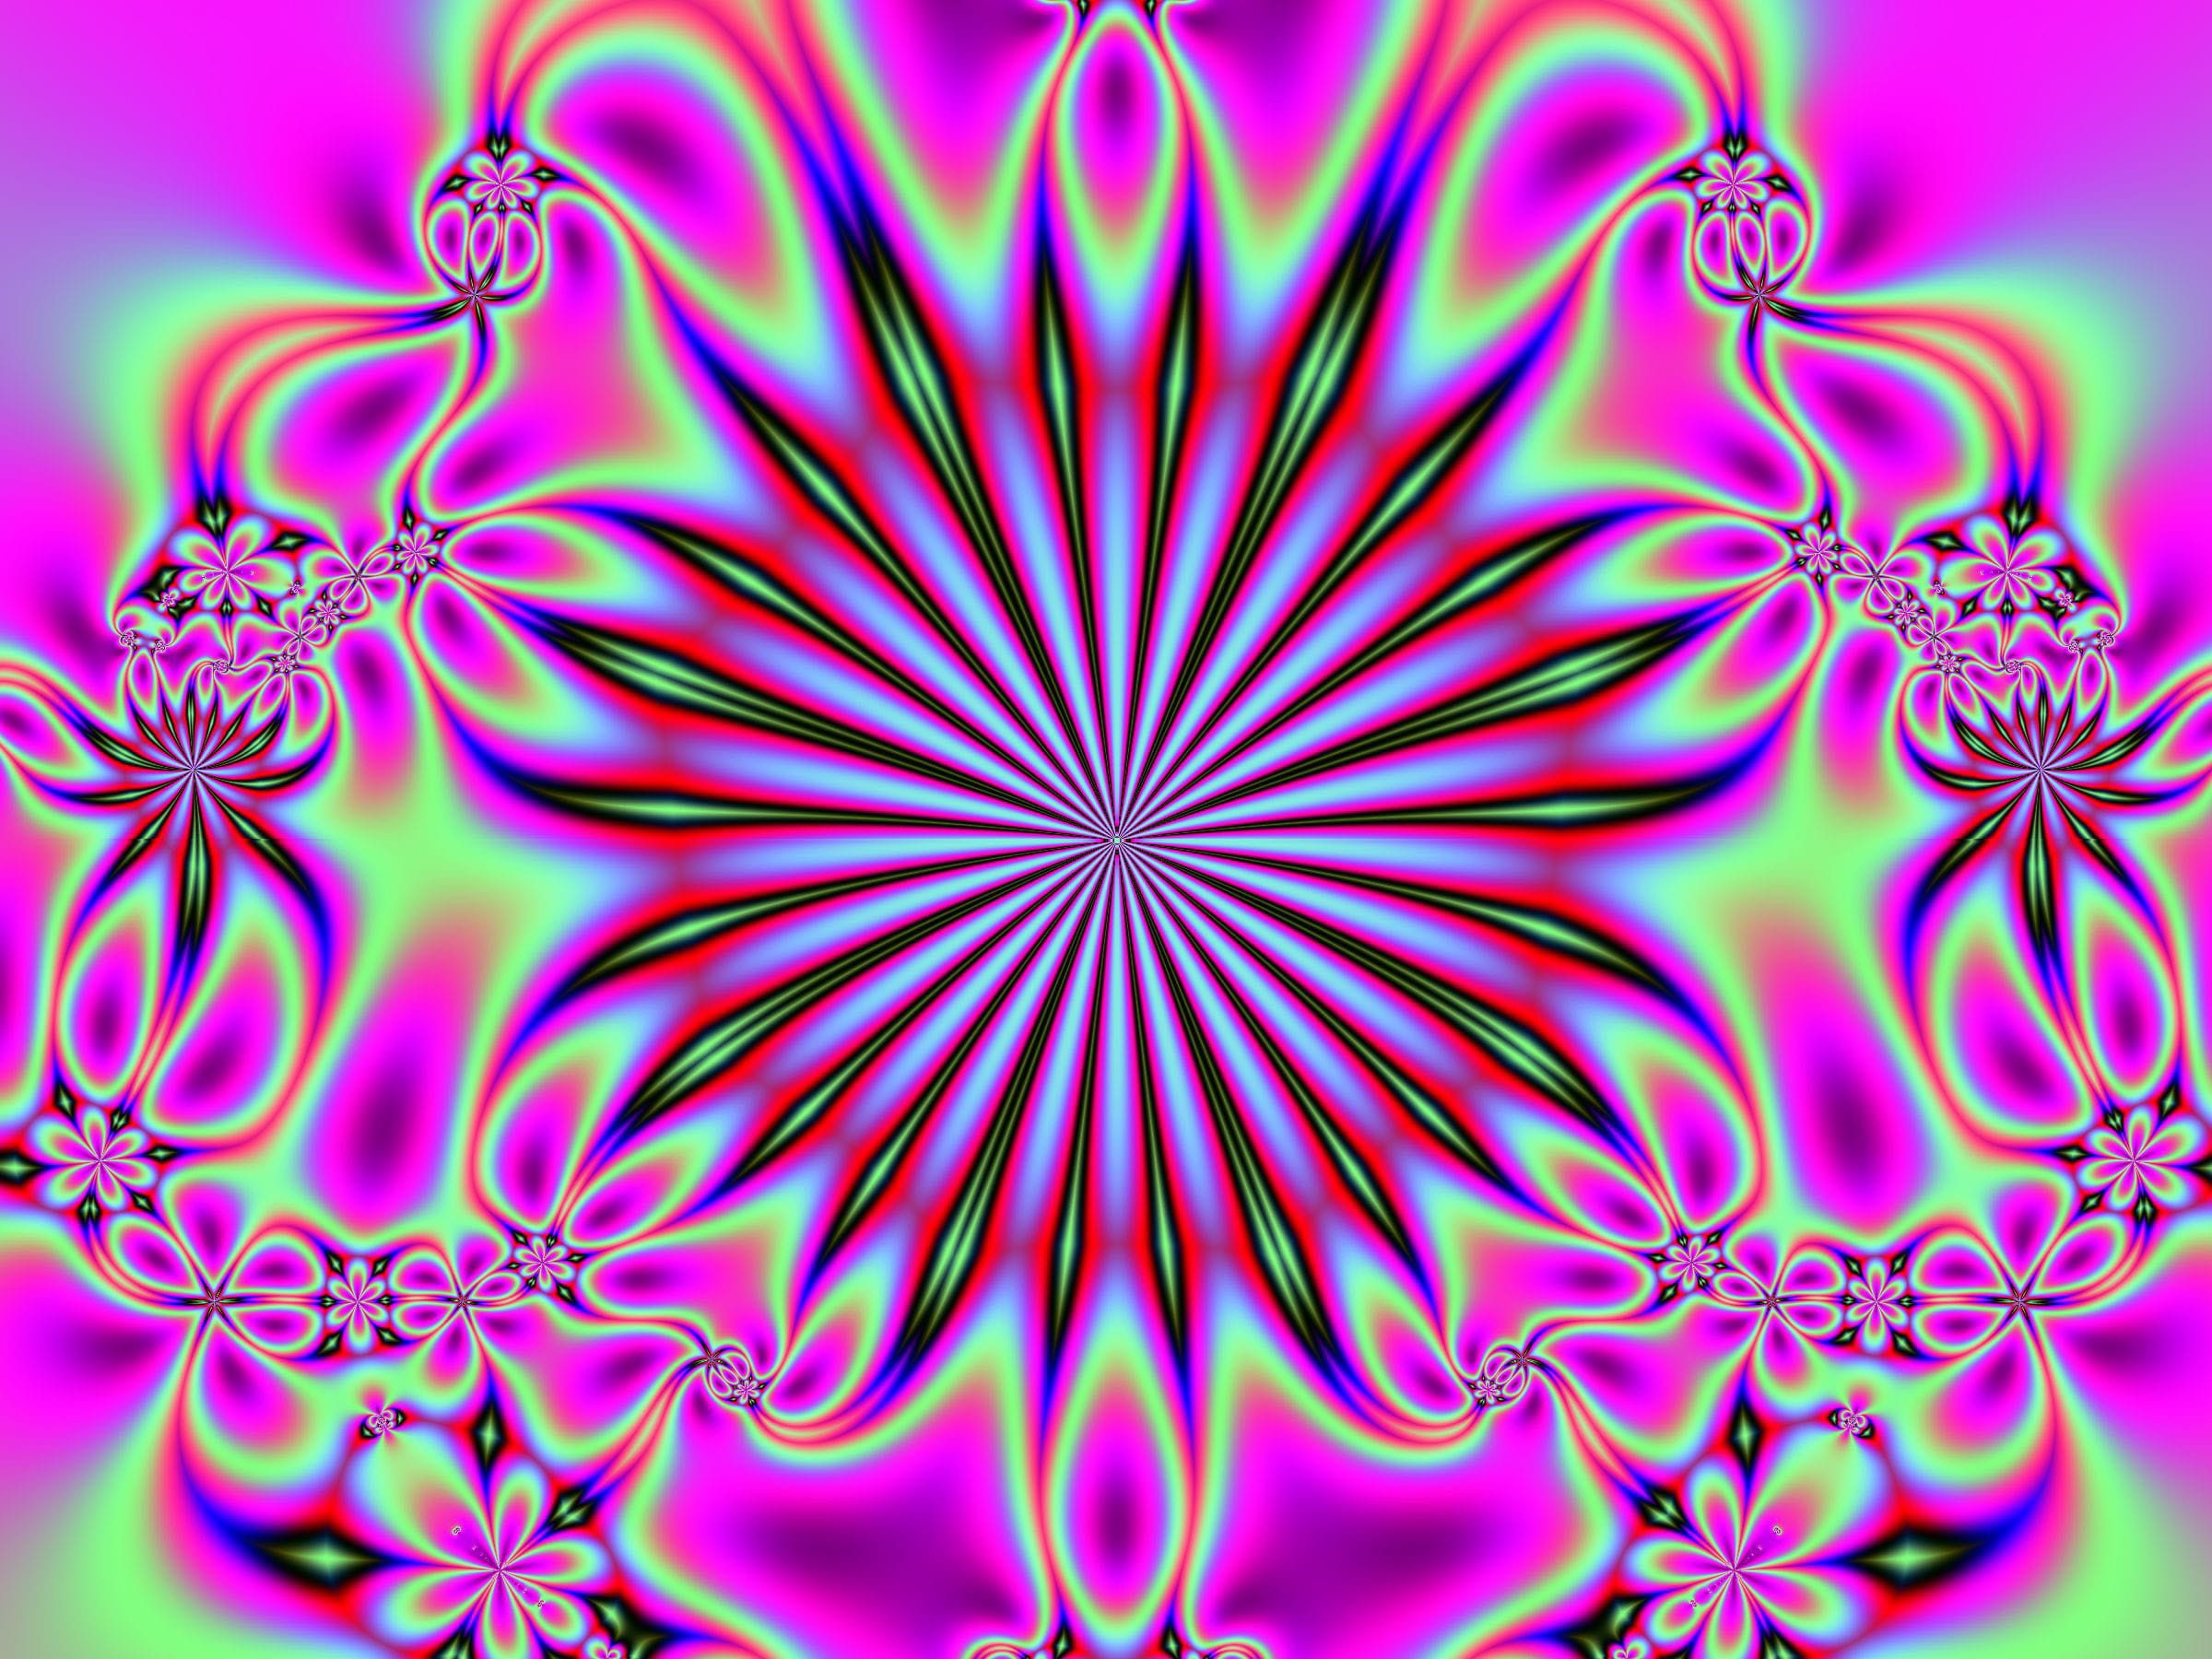 Fractal-based, background, abstract pattern, symmetrical, symmetry